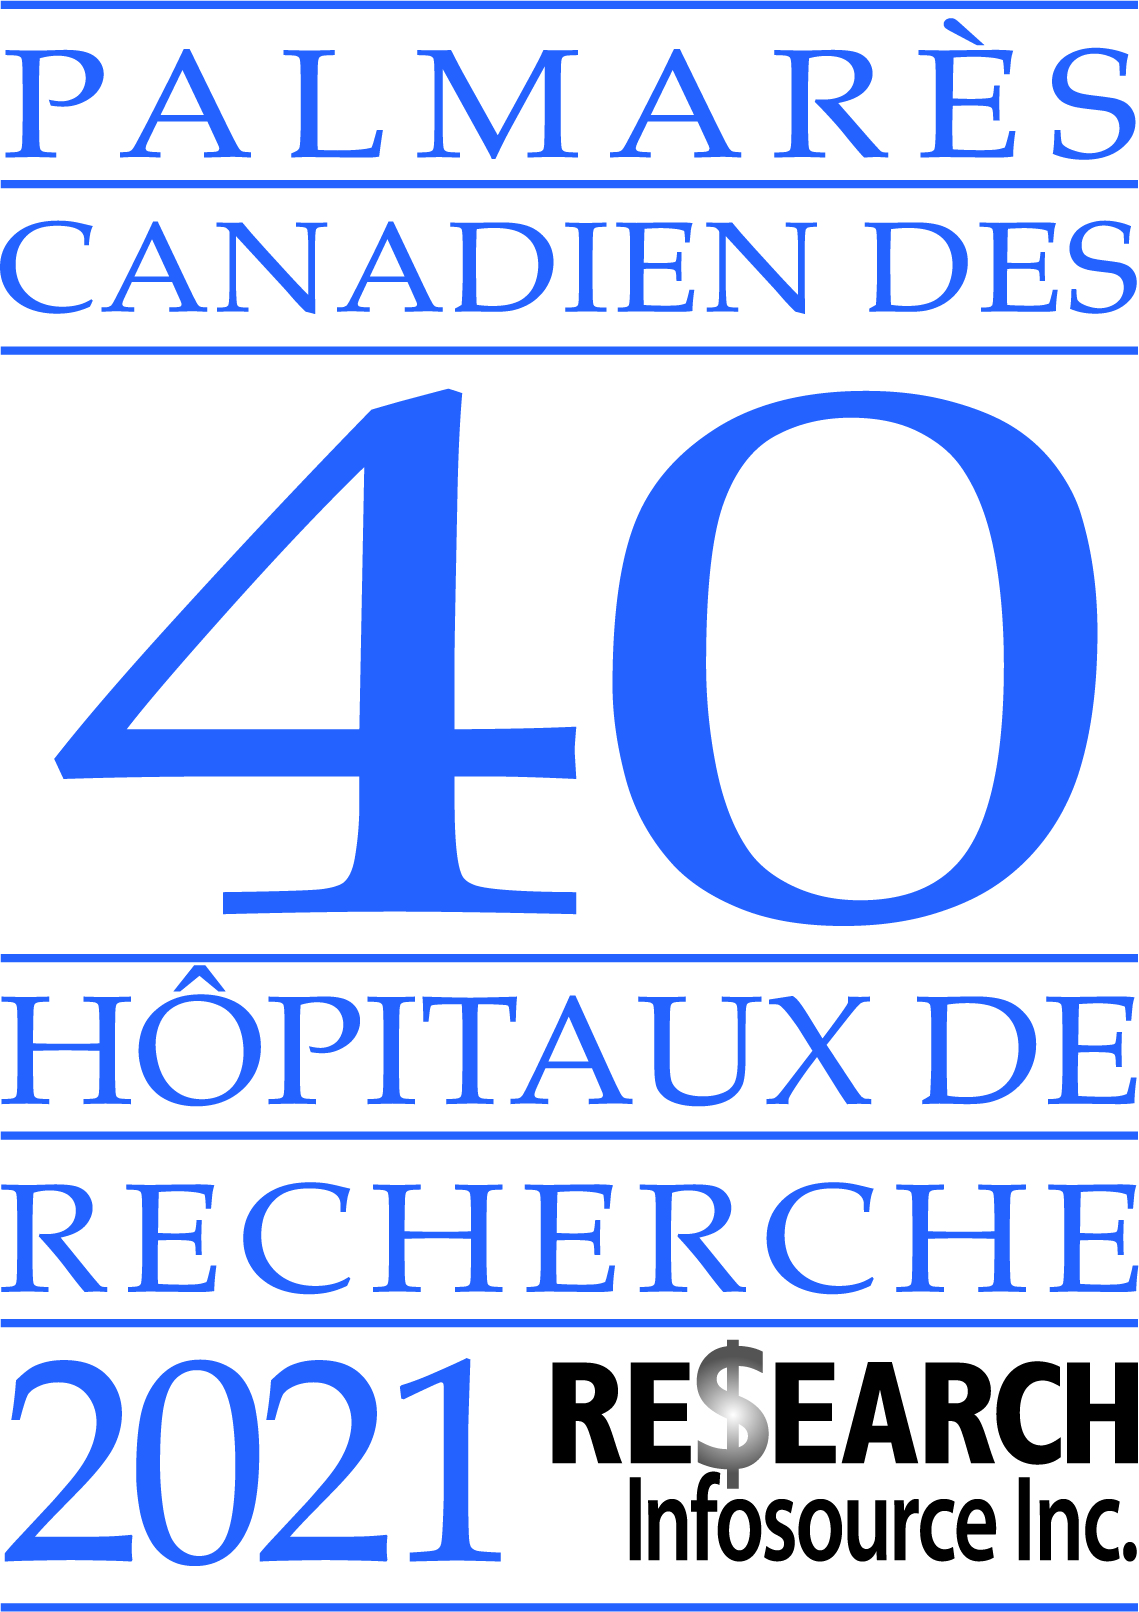 Canadian top 40 research hospital list 2021